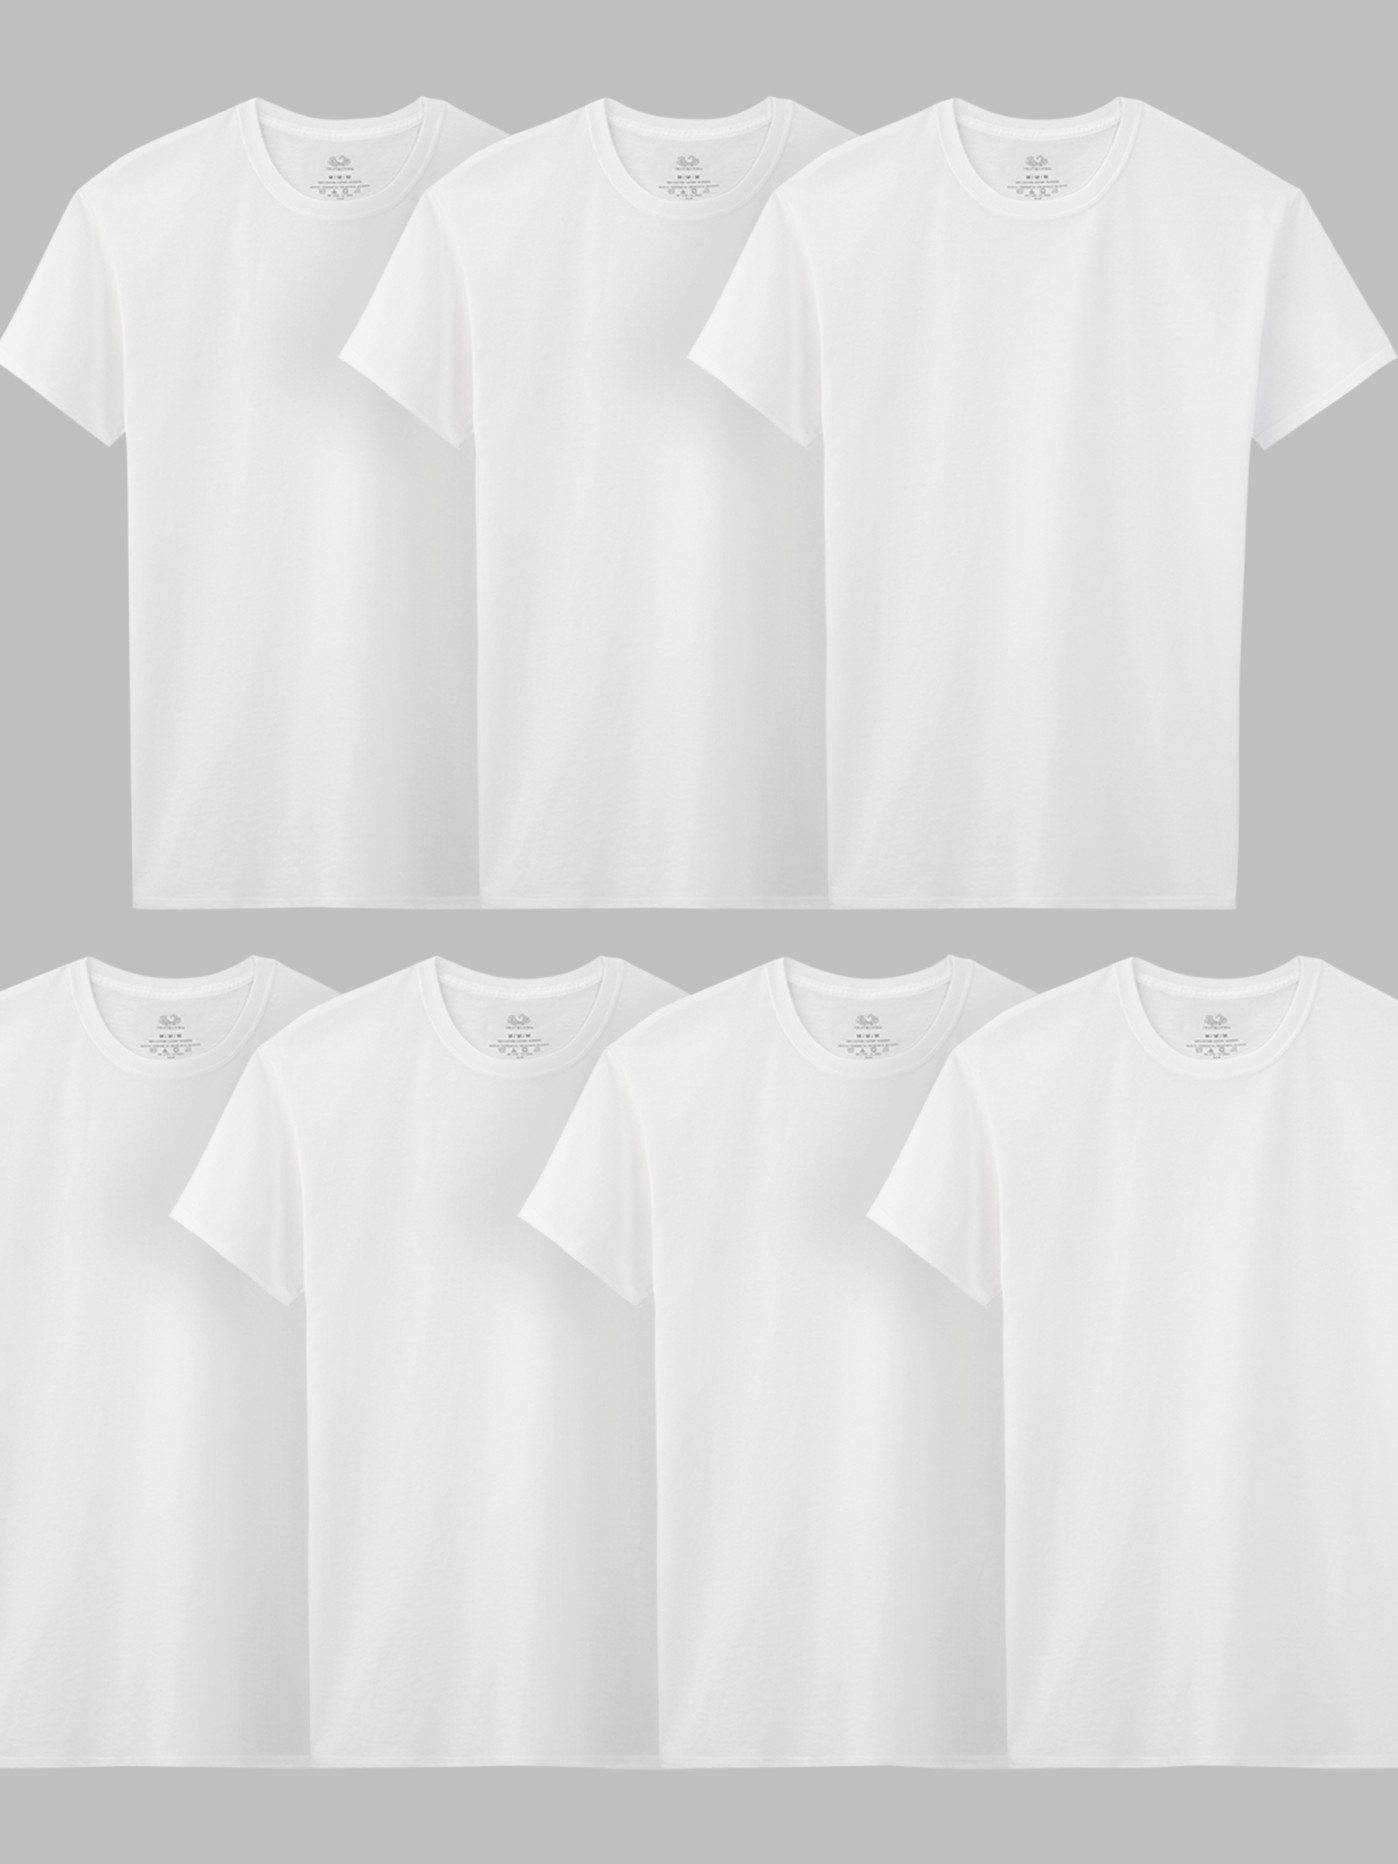  Fruit of the Loom Boys White T Shirt 8 Pack White Size Small  6-8: Clothing, Shoes & Jewelry